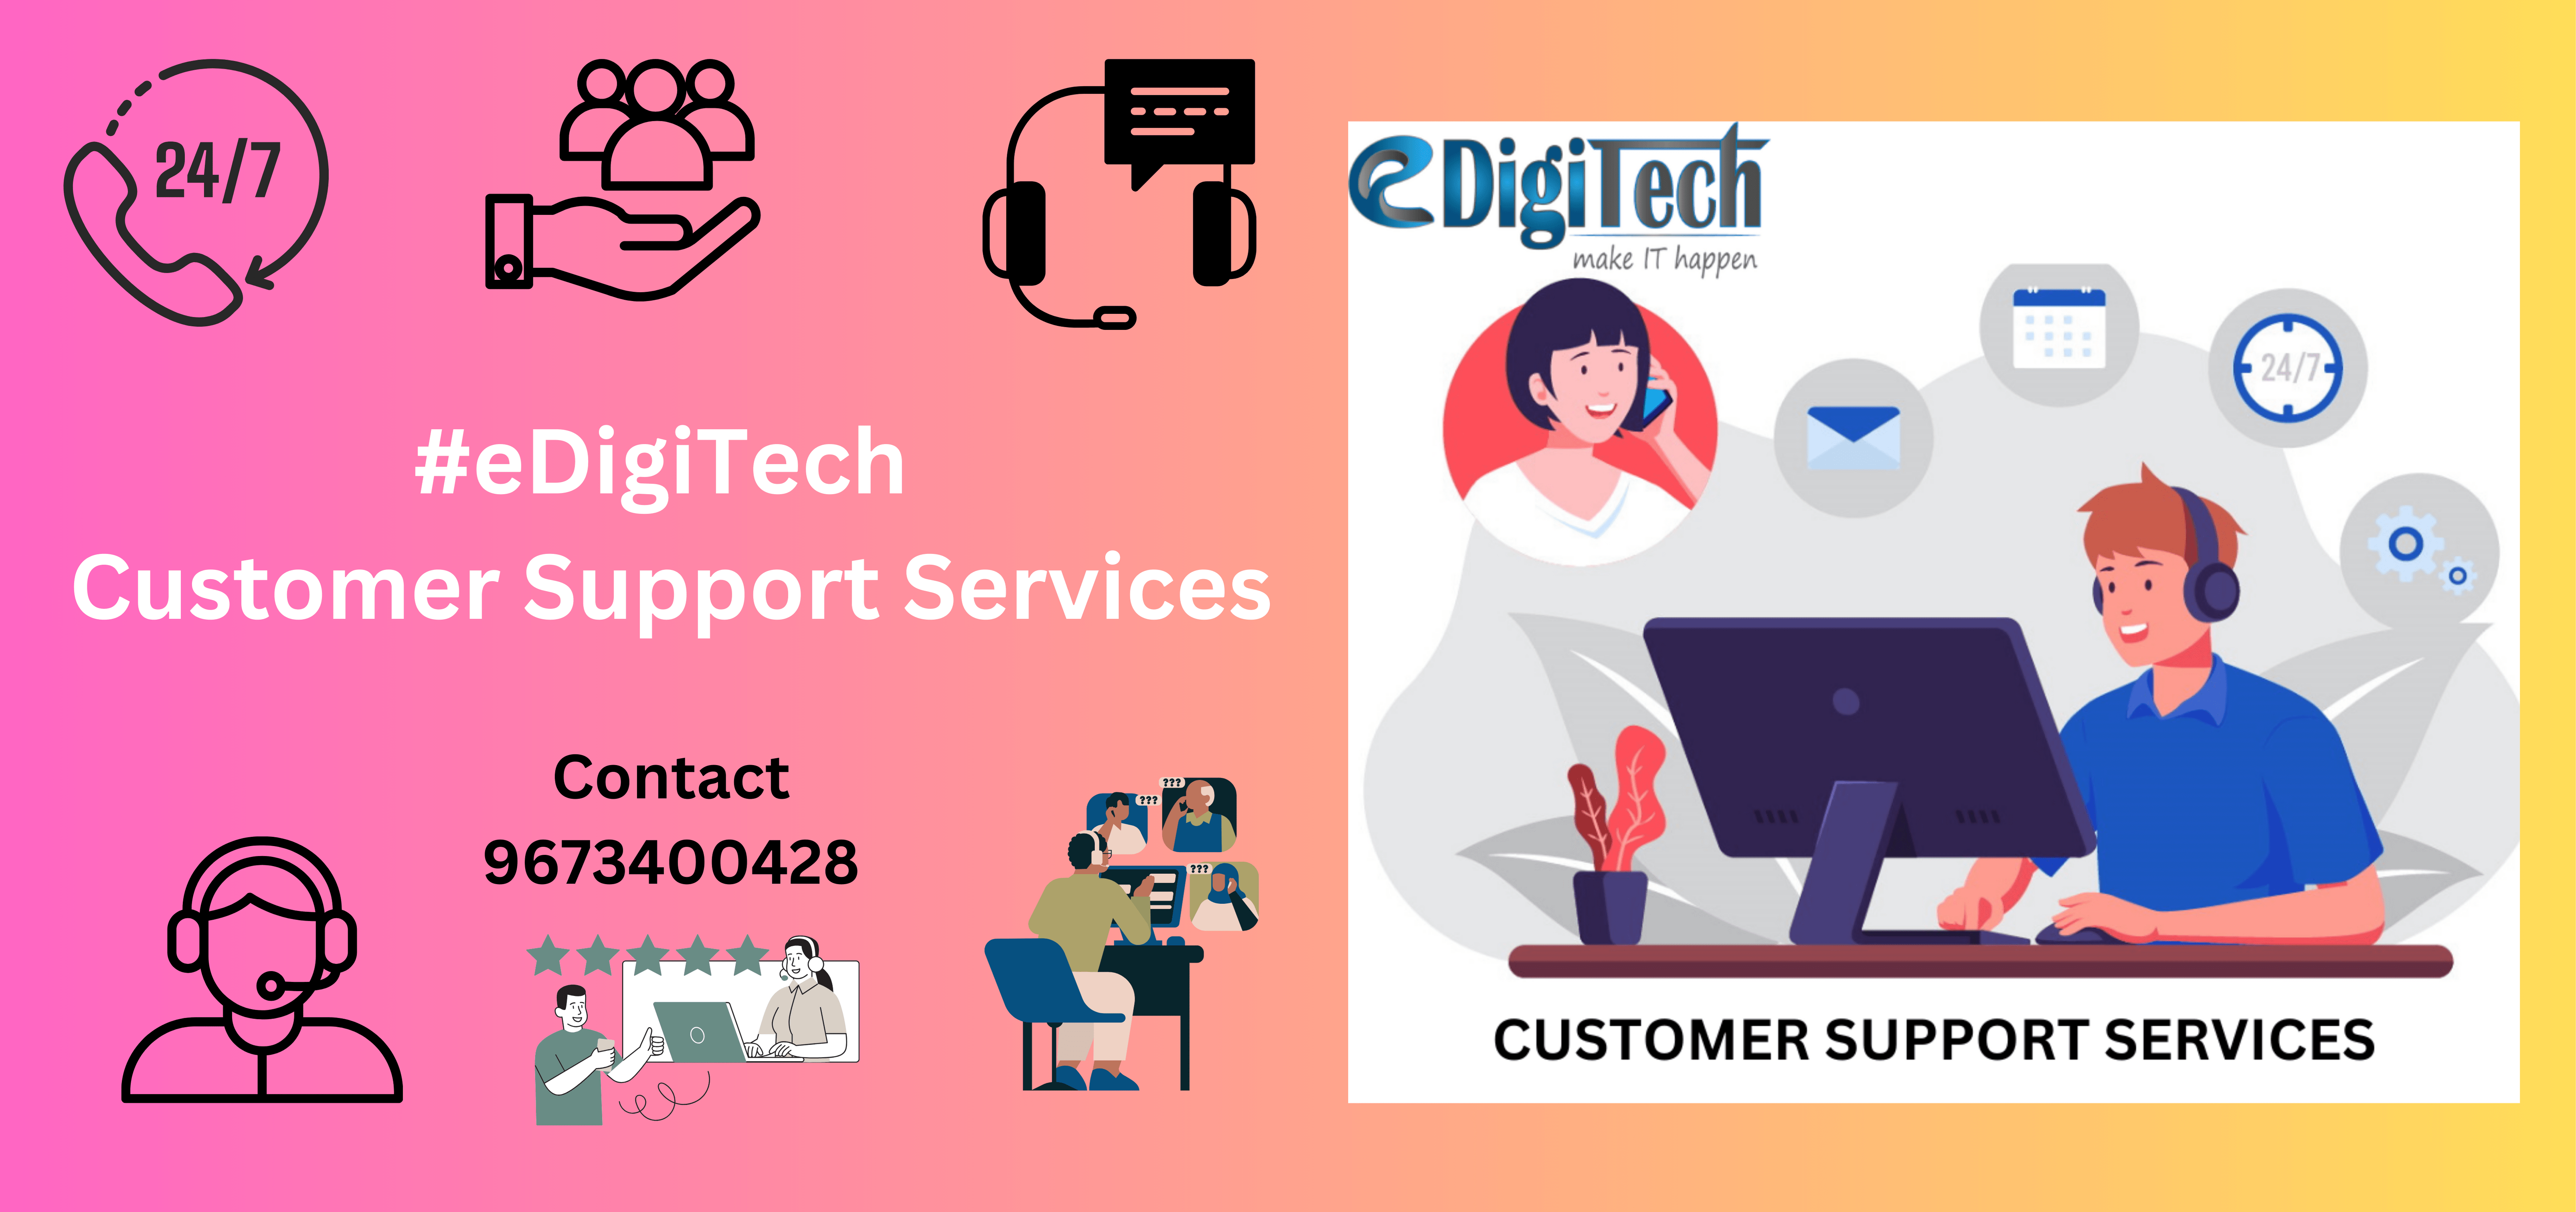 Customer Support Services by eDigiTech